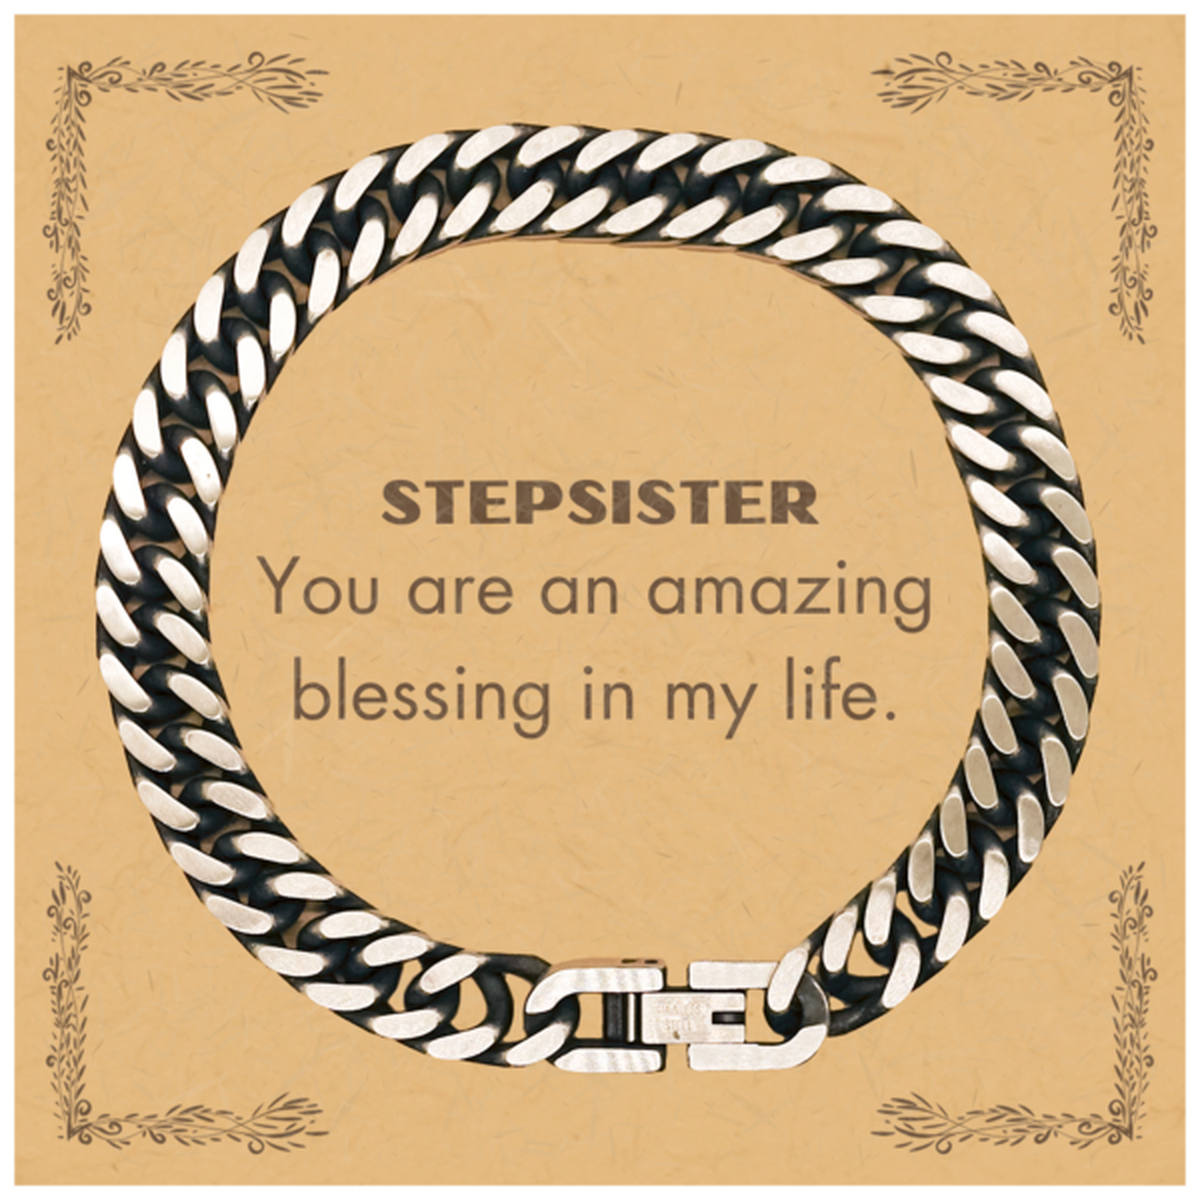 Stepsister Cuban Link Chain Bracelet, You are an amazing blessing in my life, Thank You Gifts For Stepsister, Inspirational Birthday Christmas Unique Gifts For Stepsister